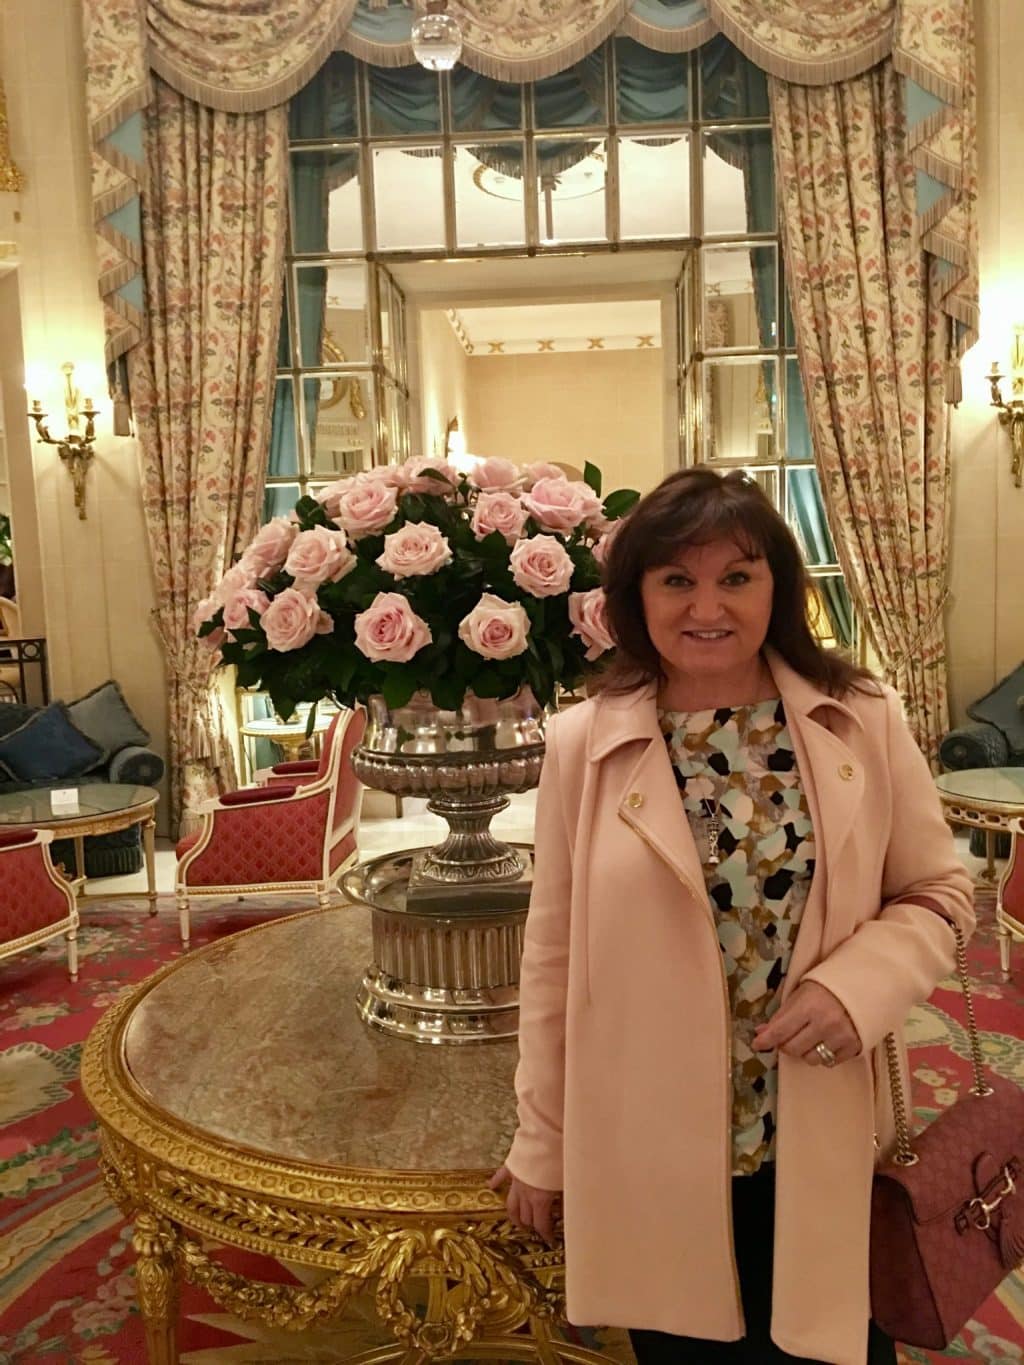 Valentines Week in the Ritz London, lady with pink coat